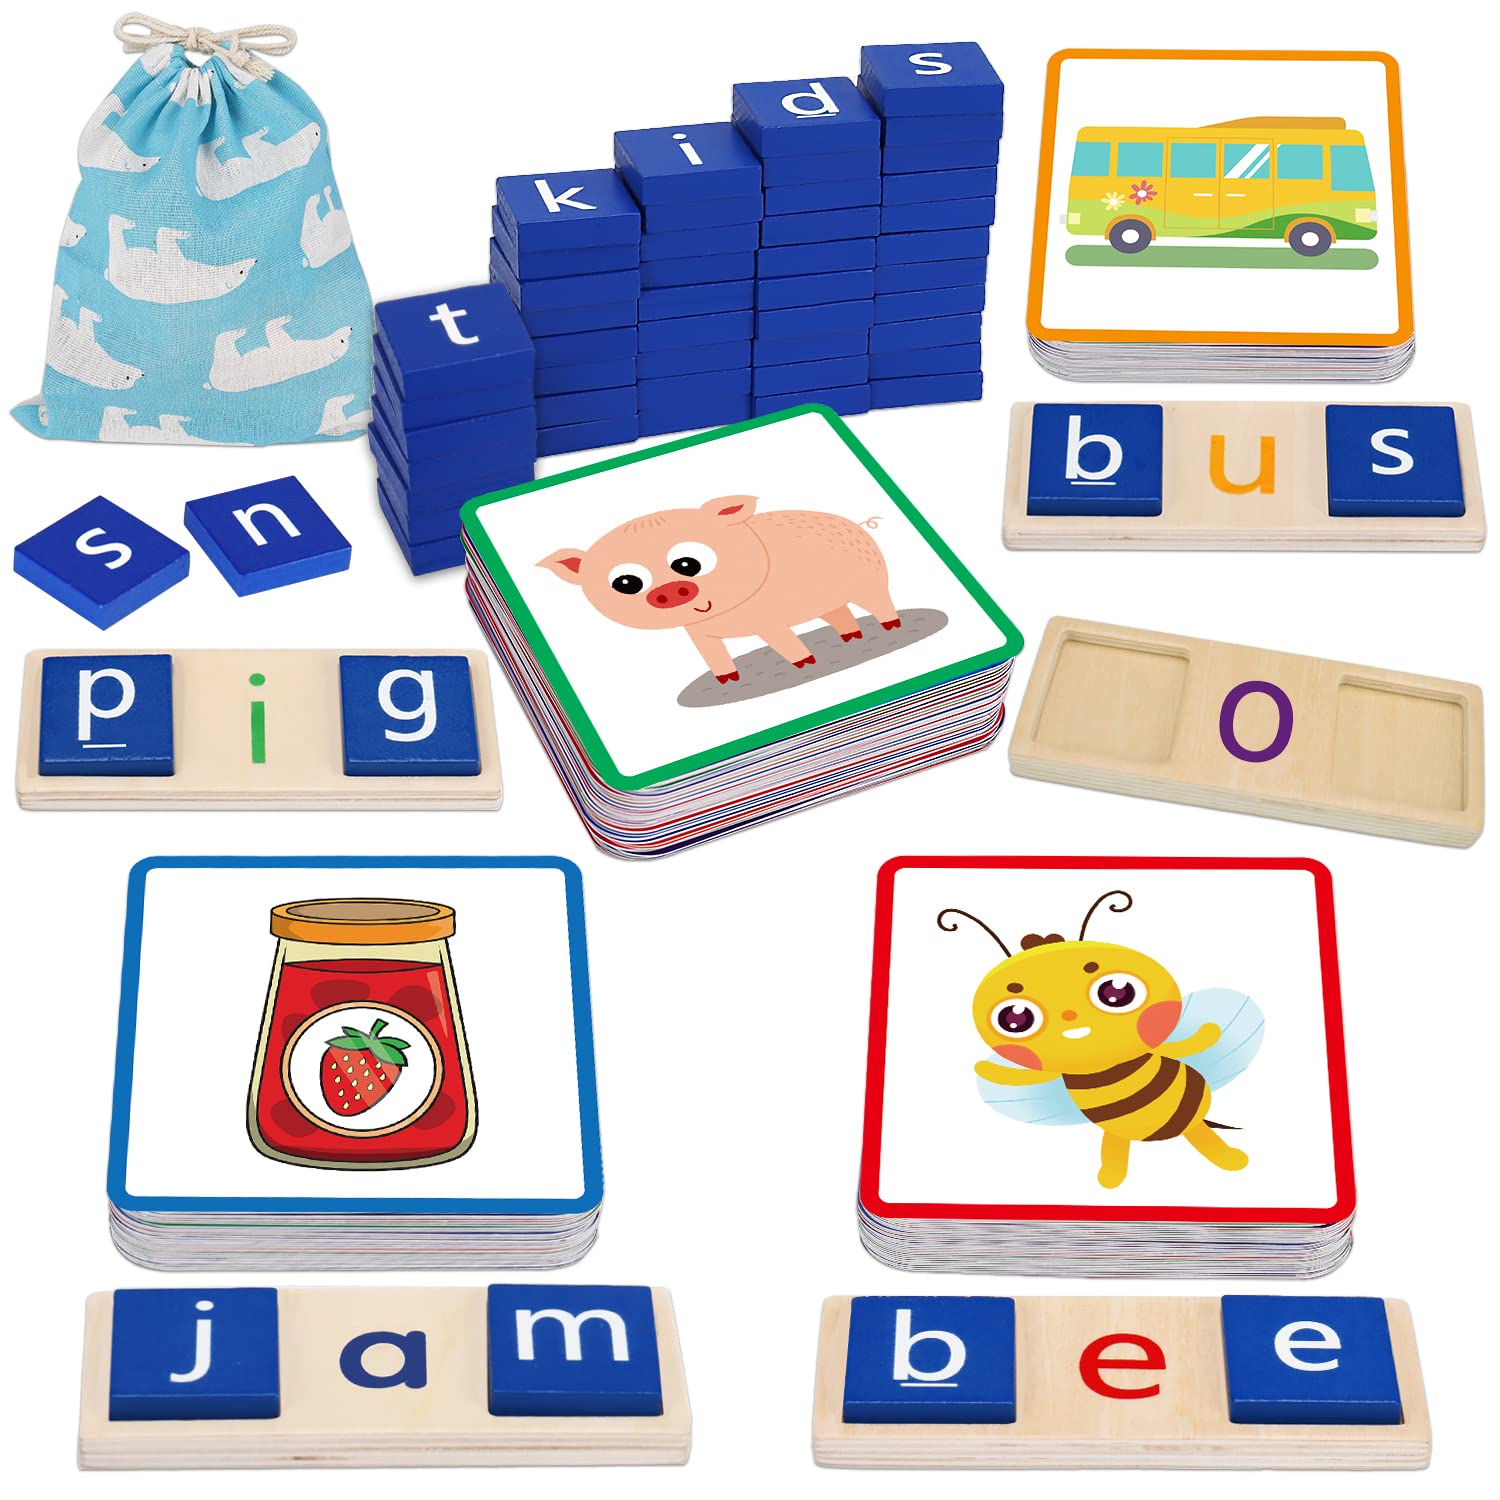 Wooden vowel learning toys with sight word flash cards kindergarten classroom must haves cvc words spelling games preschool learning activities educational toys for year old